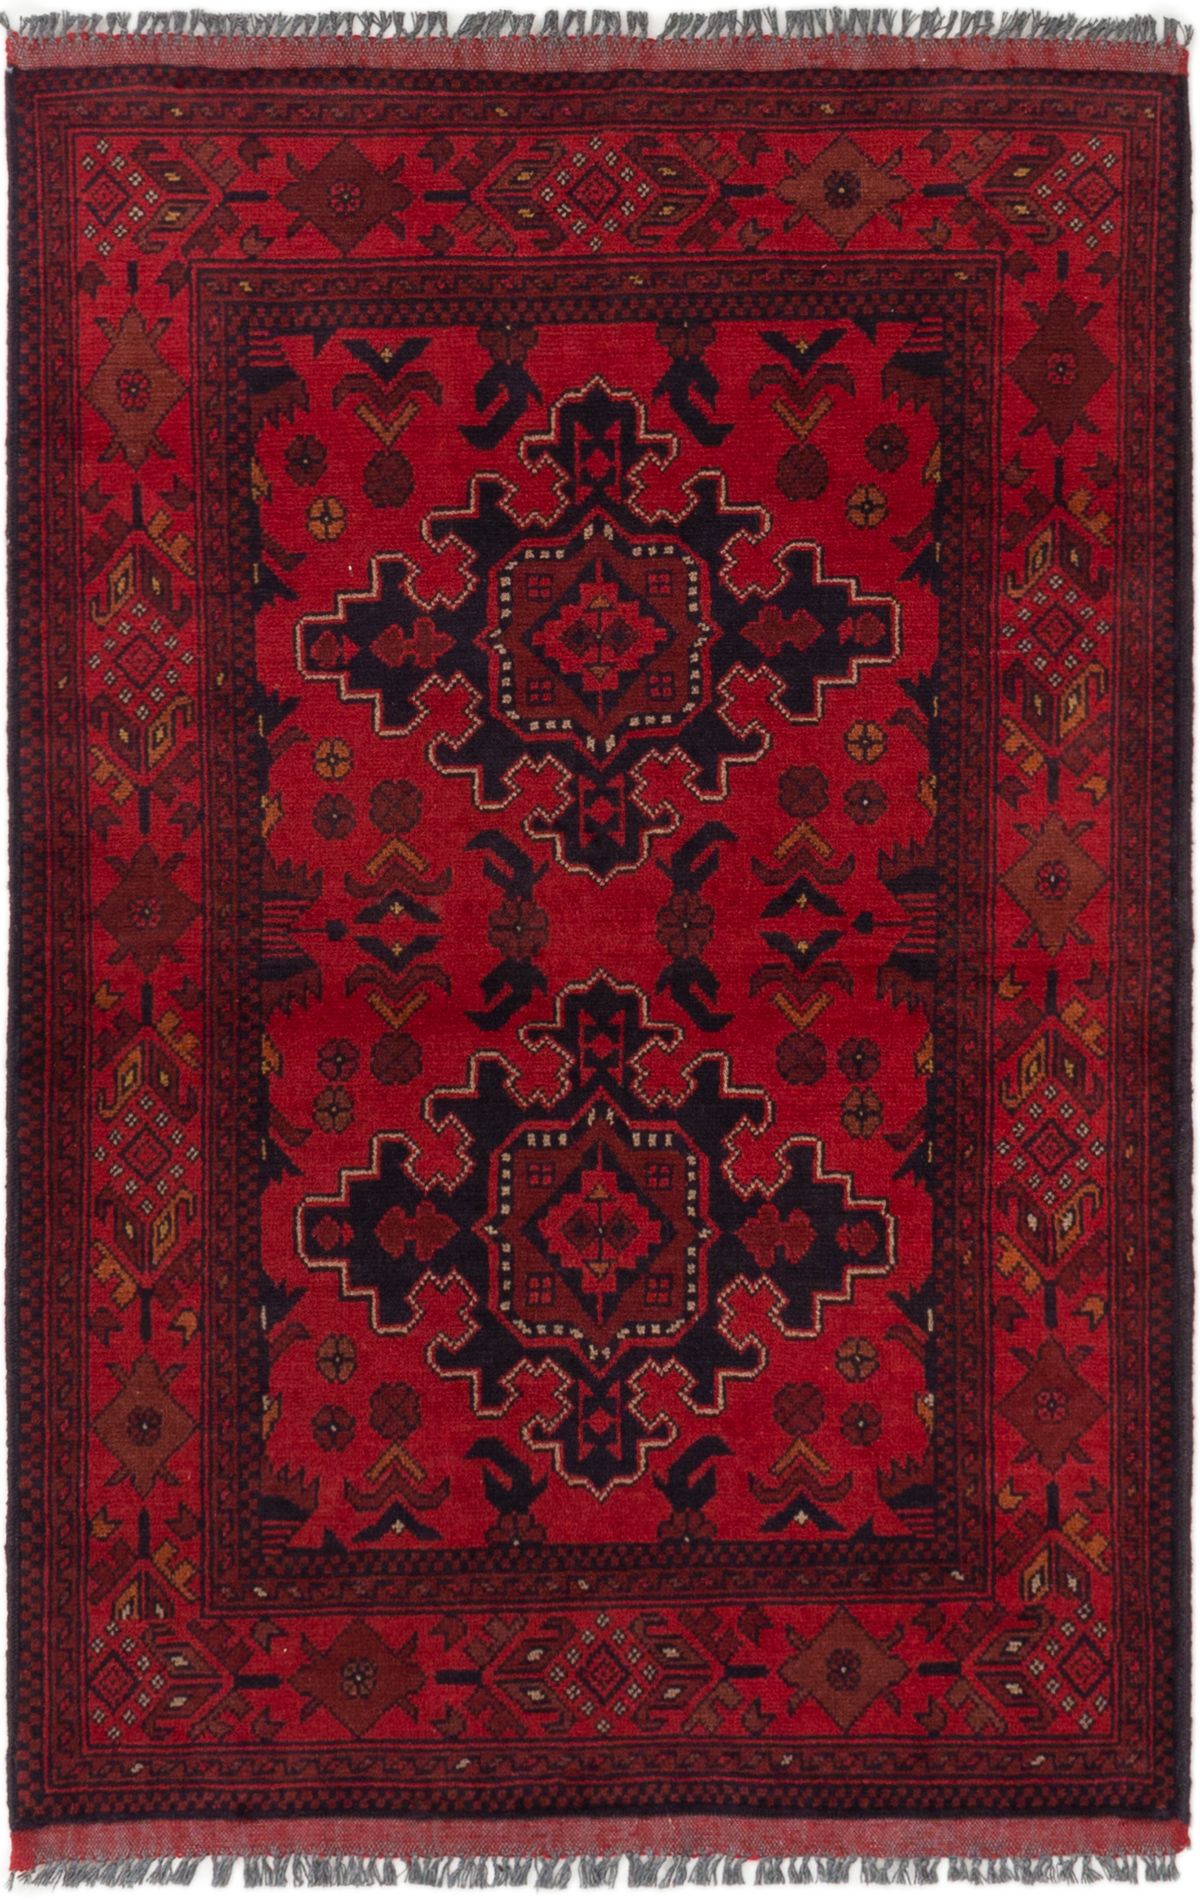 Hand-knotted Finest Khal Mohammadi Red Wool Rug 3'2" x 4'10"  Size: 3'2" x 4'10"  